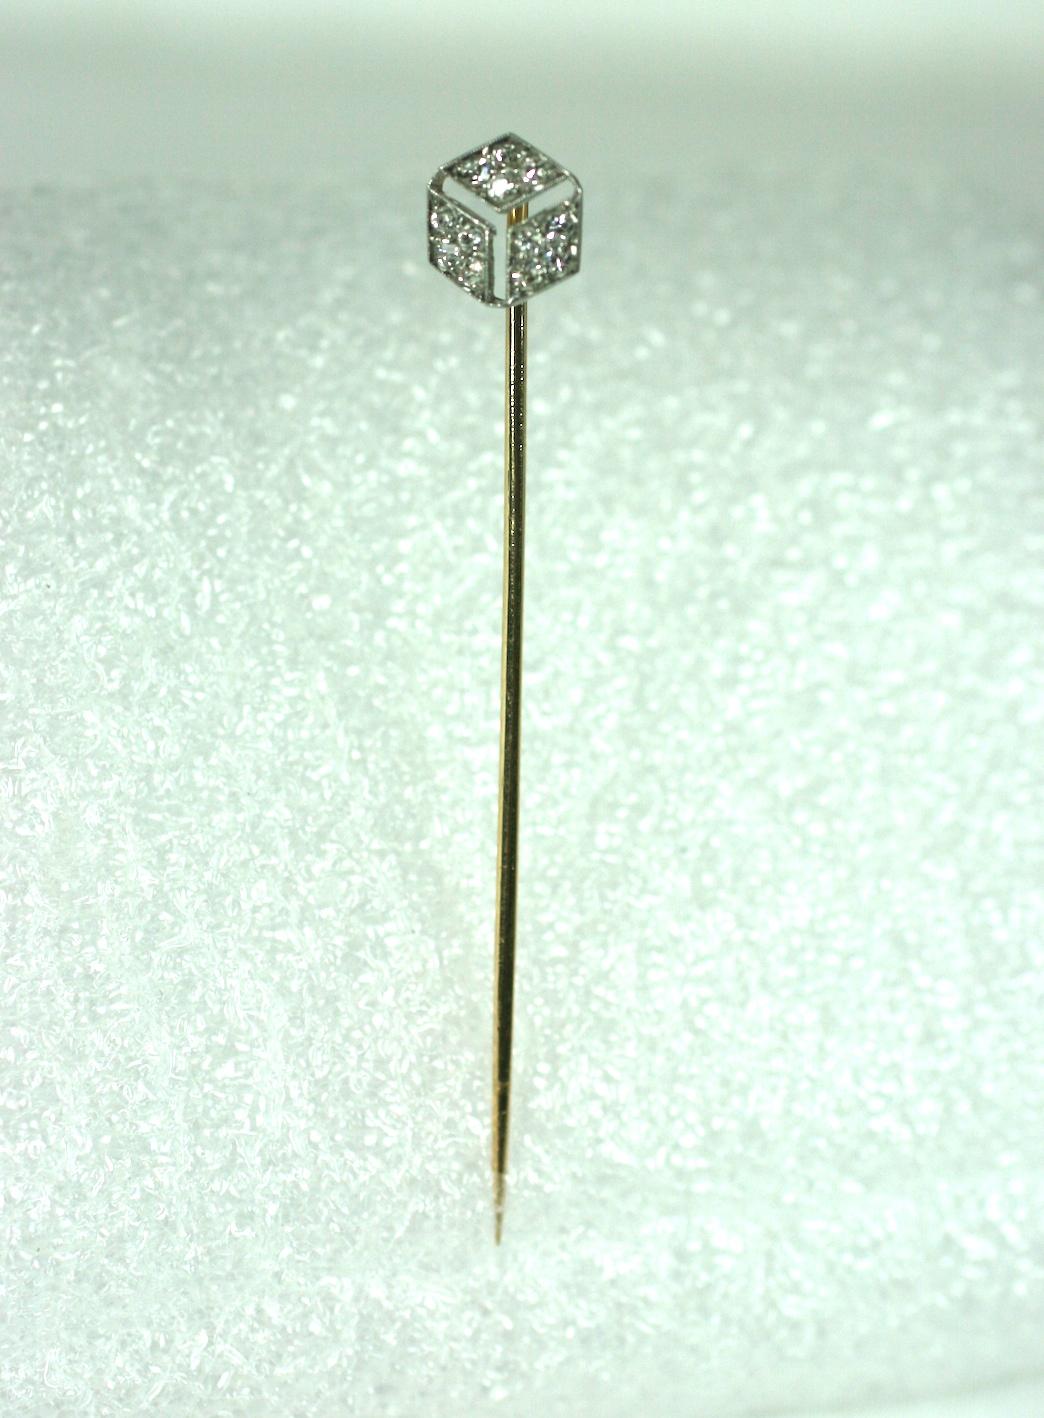 Art Deco 18k and Platinum Diamond Cube Stickpin from the 1920's. Graphic design with beautiful white pave diamonds panels forming a Deco 